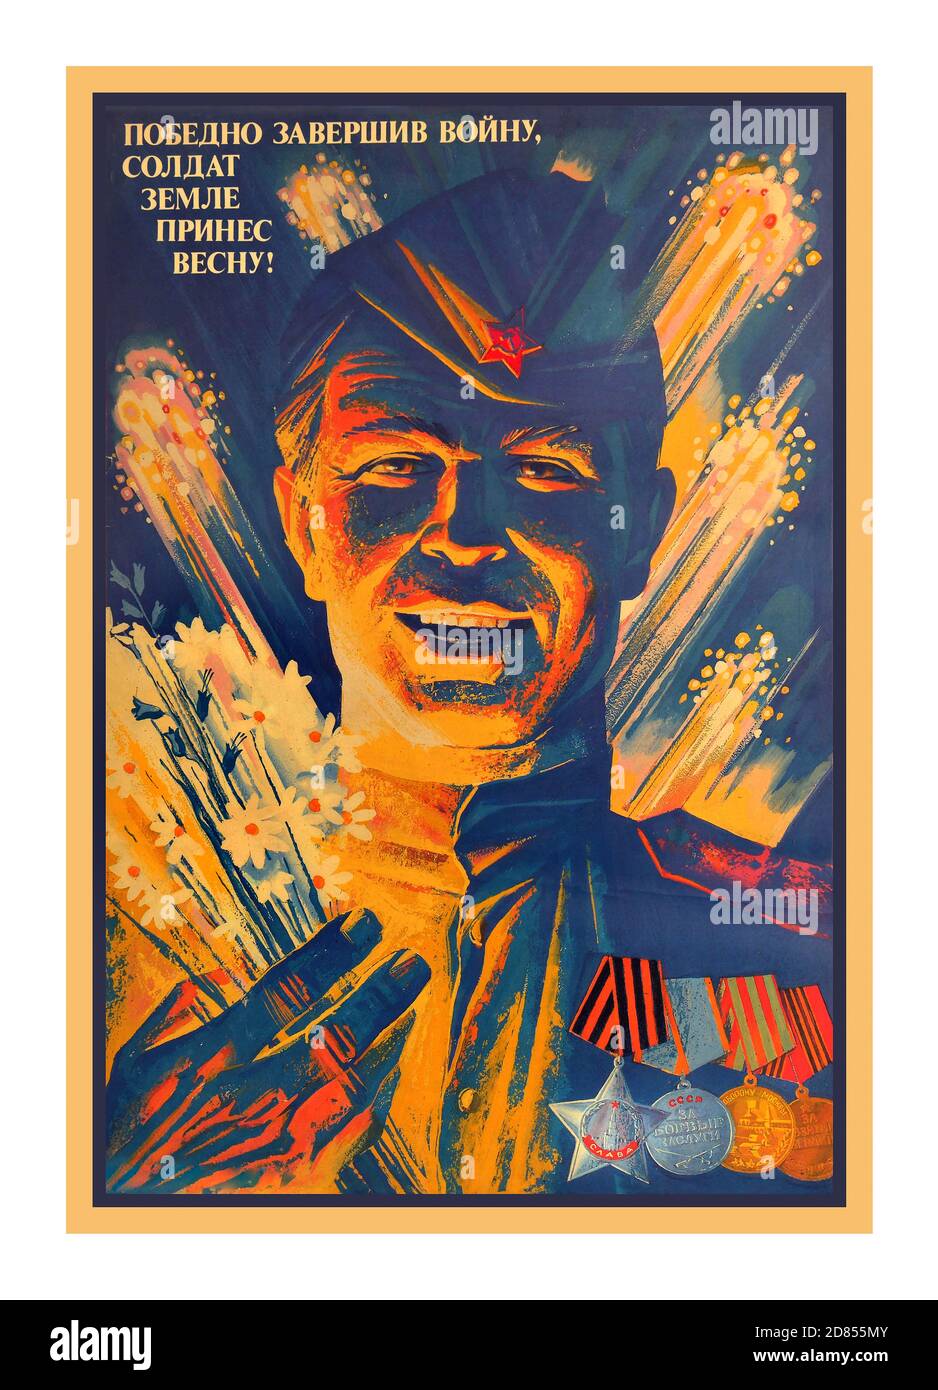 VICTORY DAY 1945 Soviet Vintage propaganda poster issued in the Soviet Union for Victory Day celebrations. Soviet soldier decorated with medals, fireworks in the background and text: Victoriously ending the war, soldier brought spring to his home! Victory Day is a holiday that commemorates the surrender of Nazi Germany in 1945. It was first inaugurated in the 15 republics of the Soviet Union, following the signing of the German Instrument of Surrender late in the evening on 8 May 1945 (after midnight, thus on 9 May Moscow Time). The Soviet government announced the victory early on 9 May 1945 Stock Photo